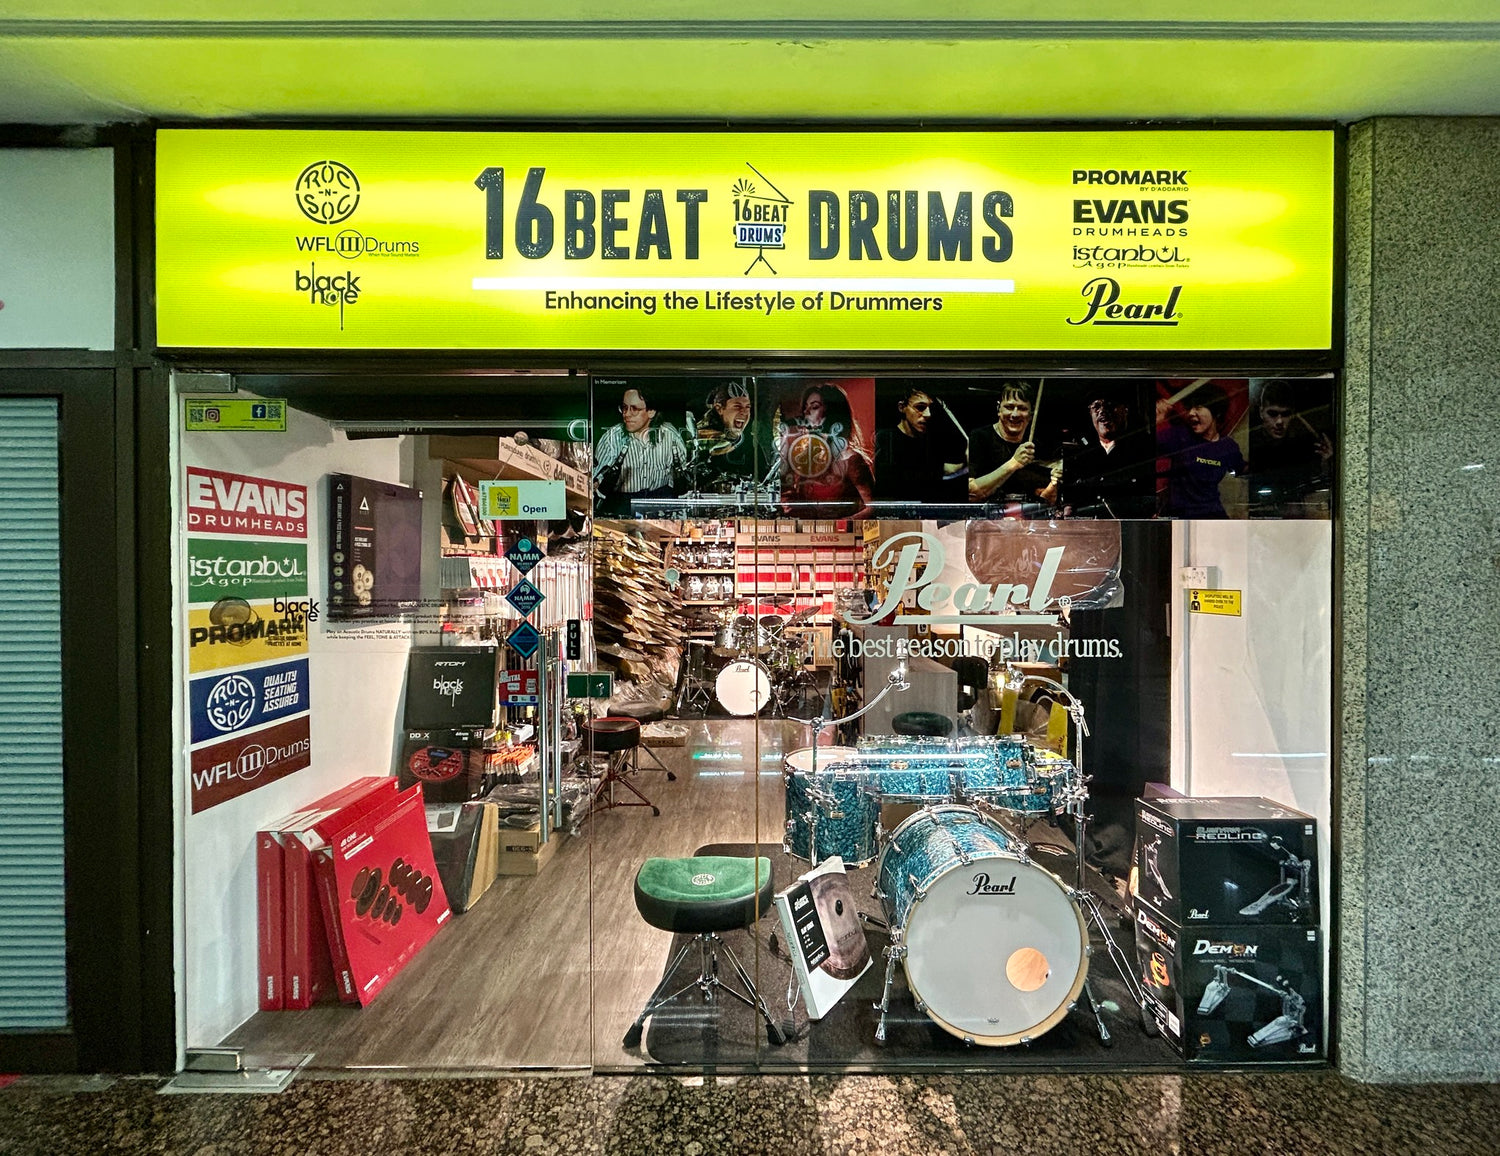 16 Beat Drums all products